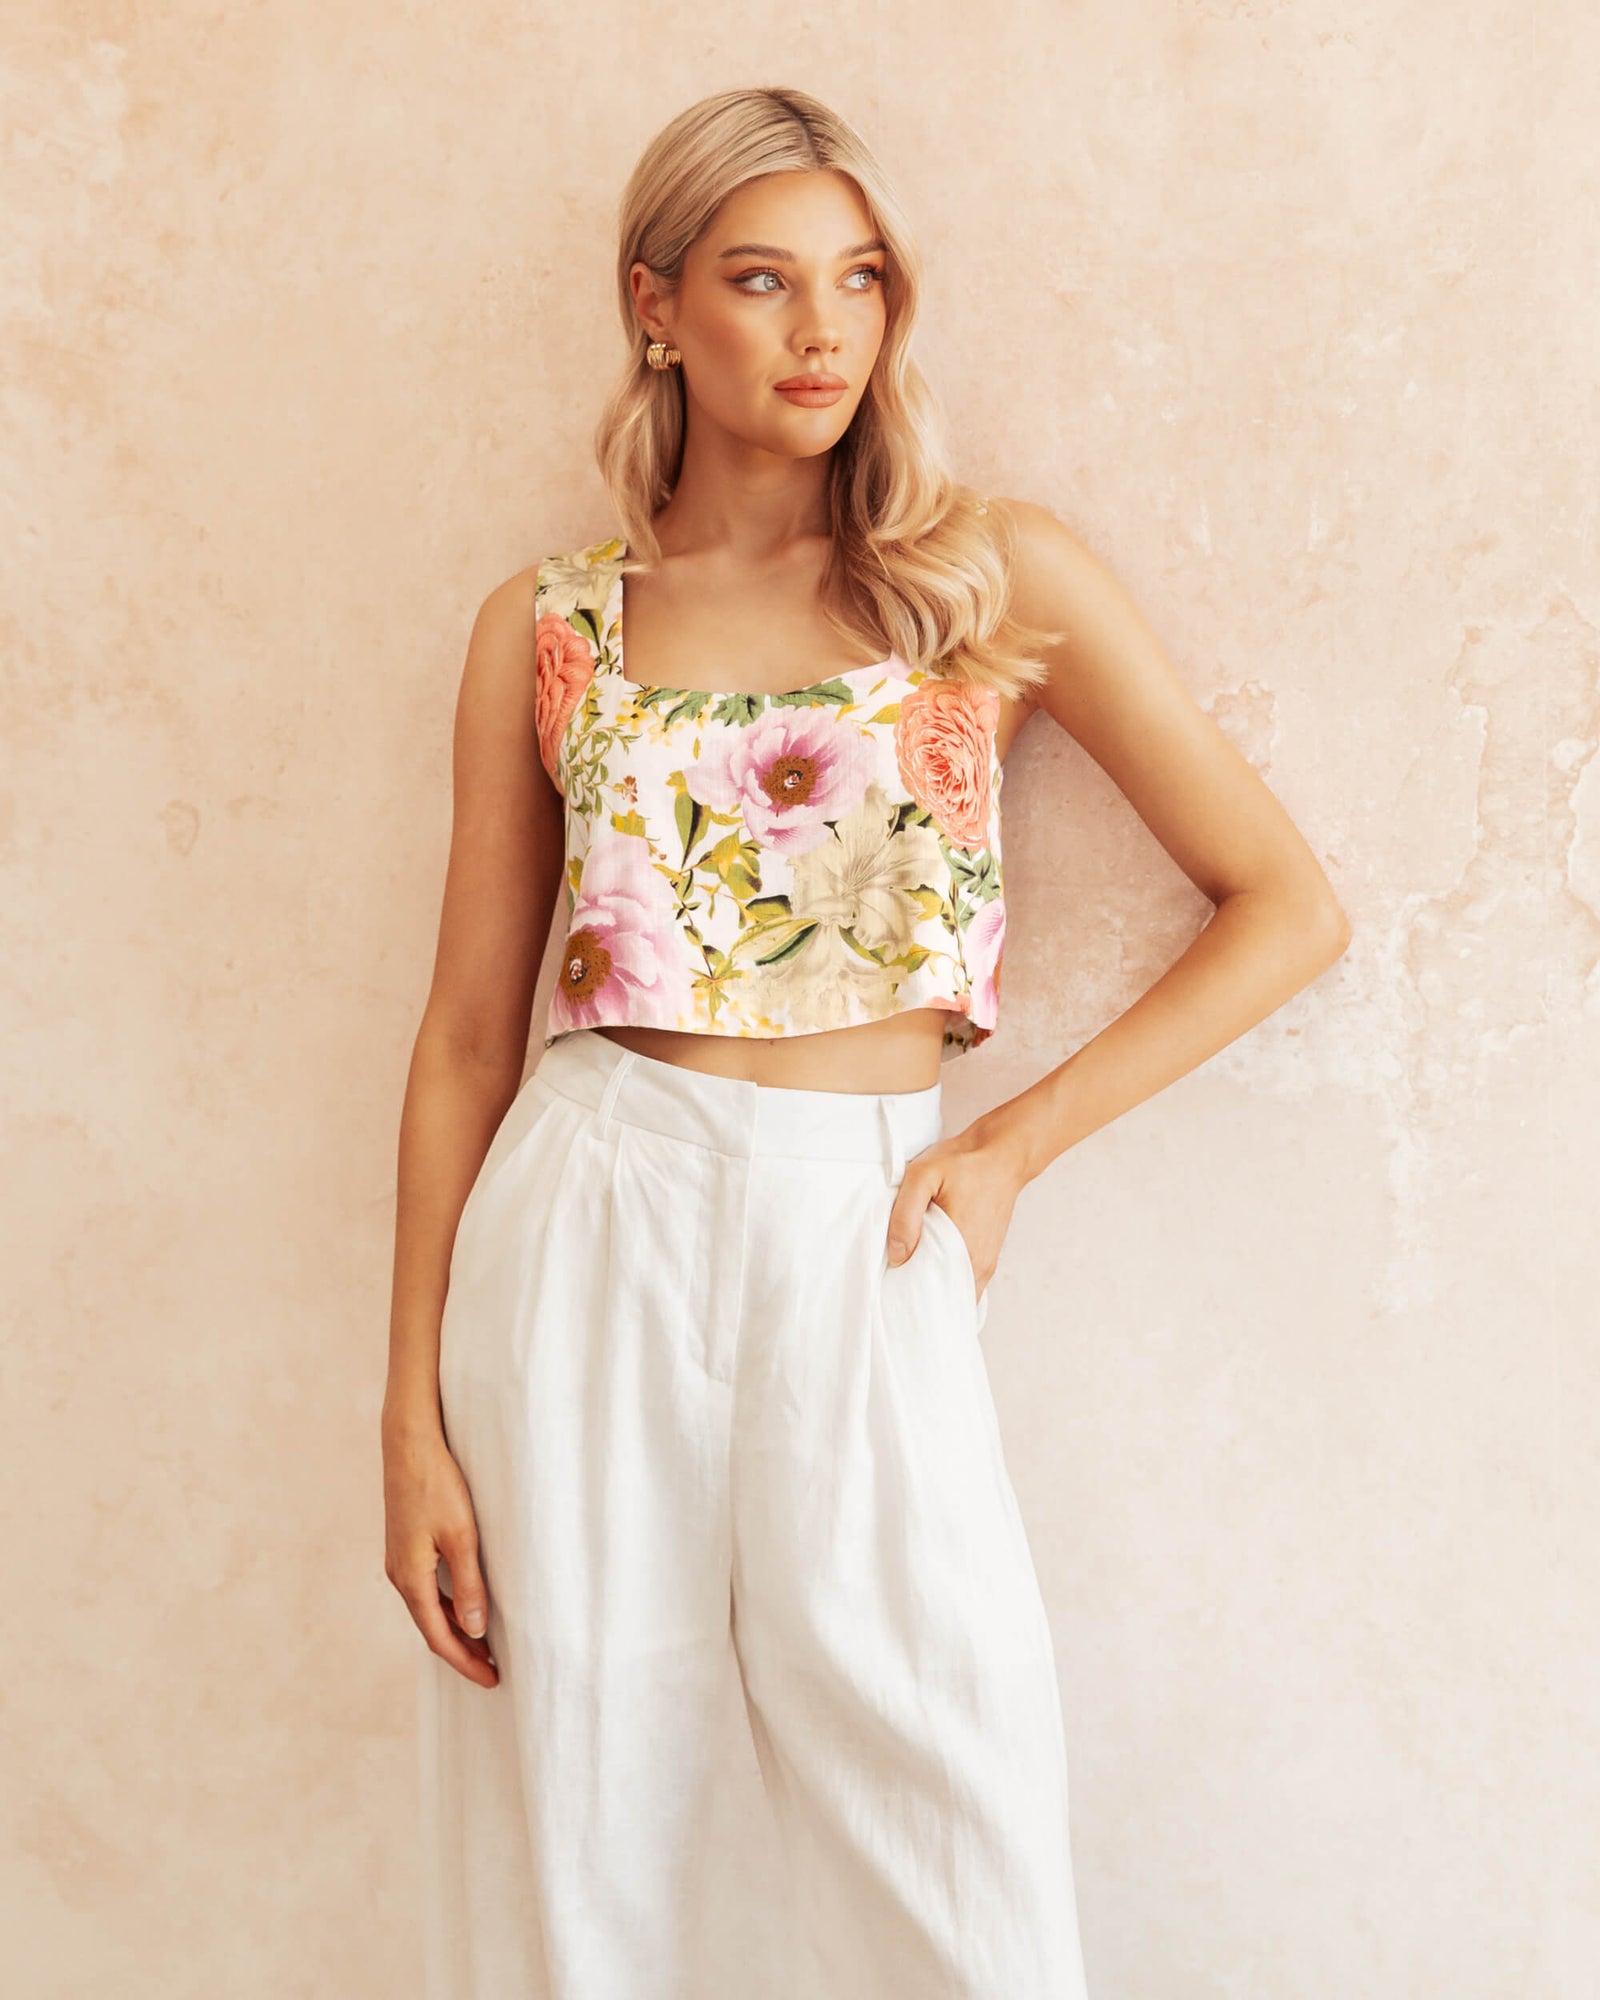 LINEN SQUARE NECK CROP TOP - Global Fashion House